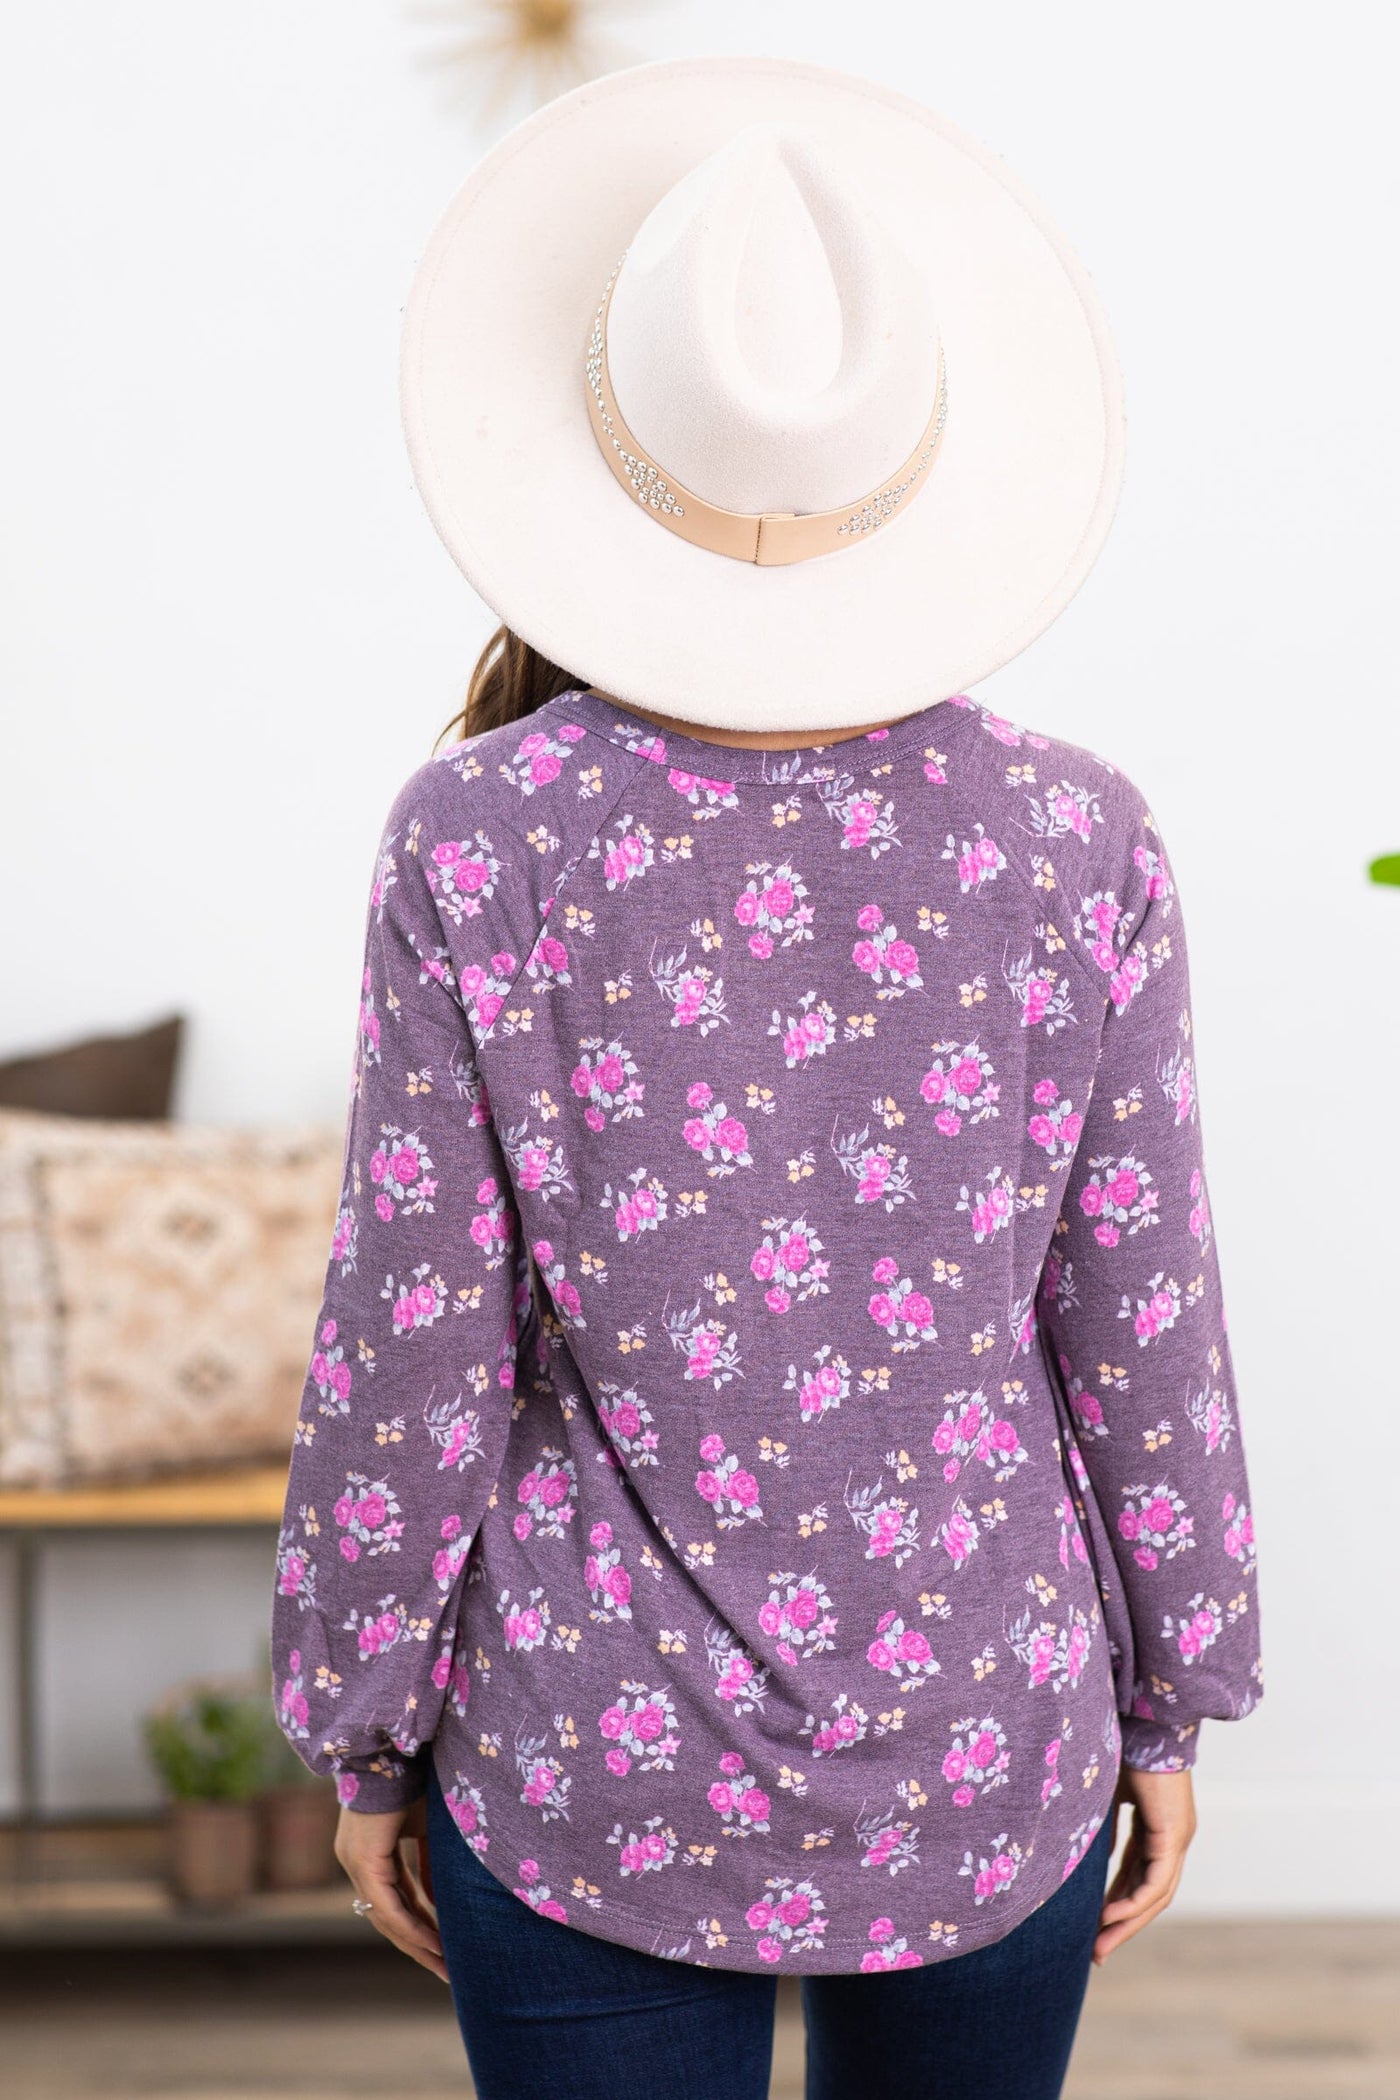 Light Eggplant and Pink Floral Print Top - Filly Flair